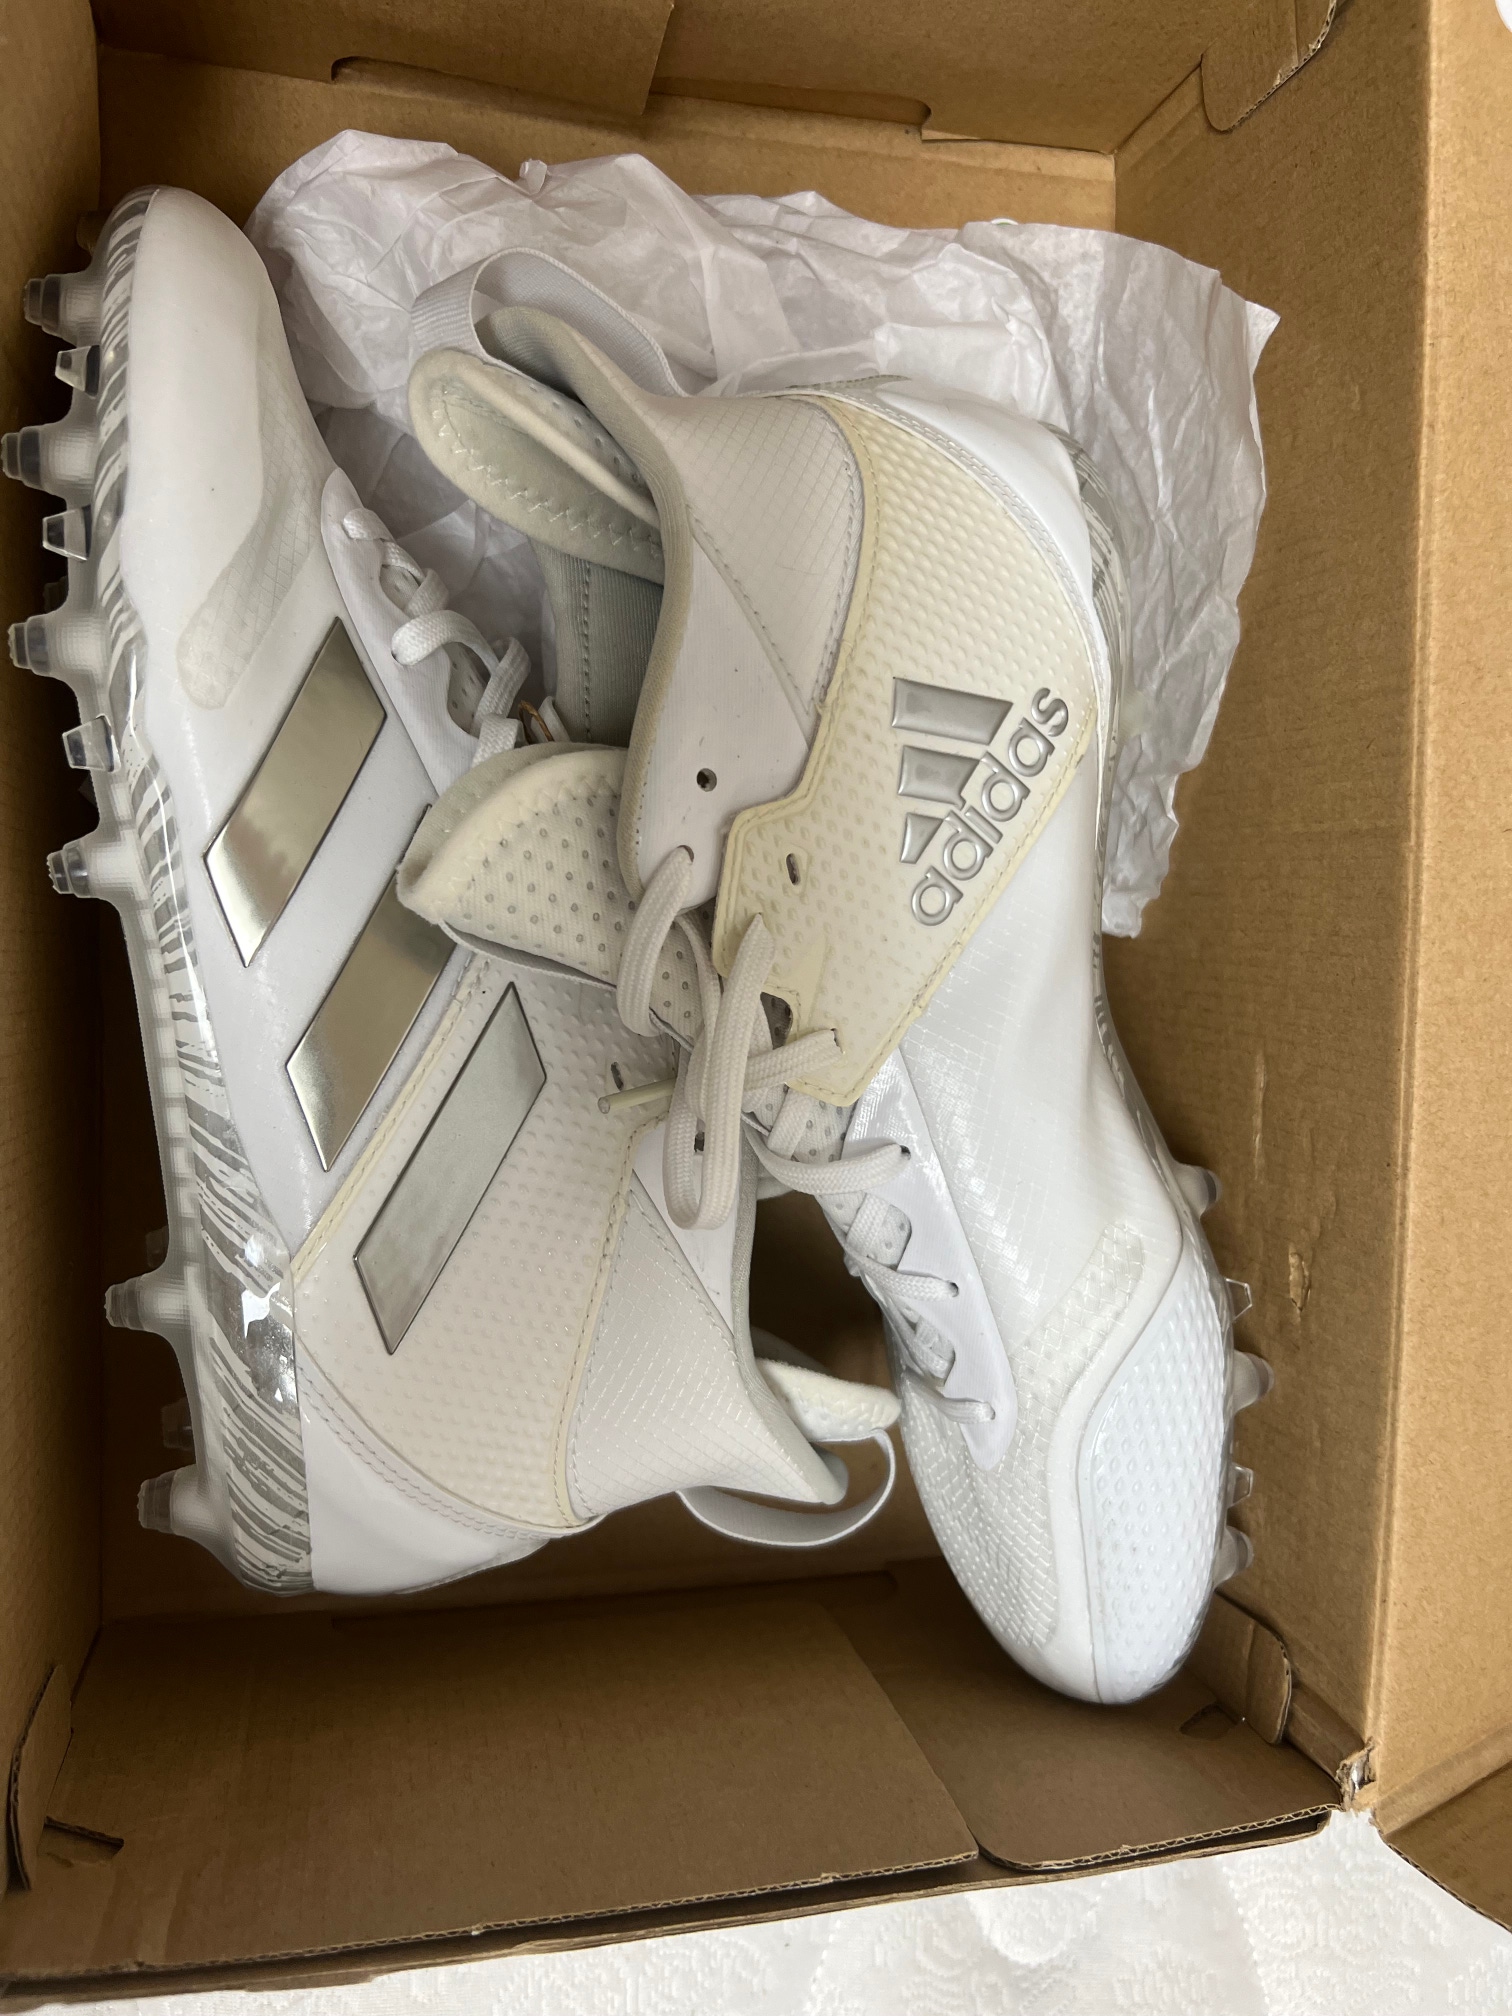 White Adult New Unisex Size 7.5 (Women's 8.5) Molded Cleats Adidas Mid Top